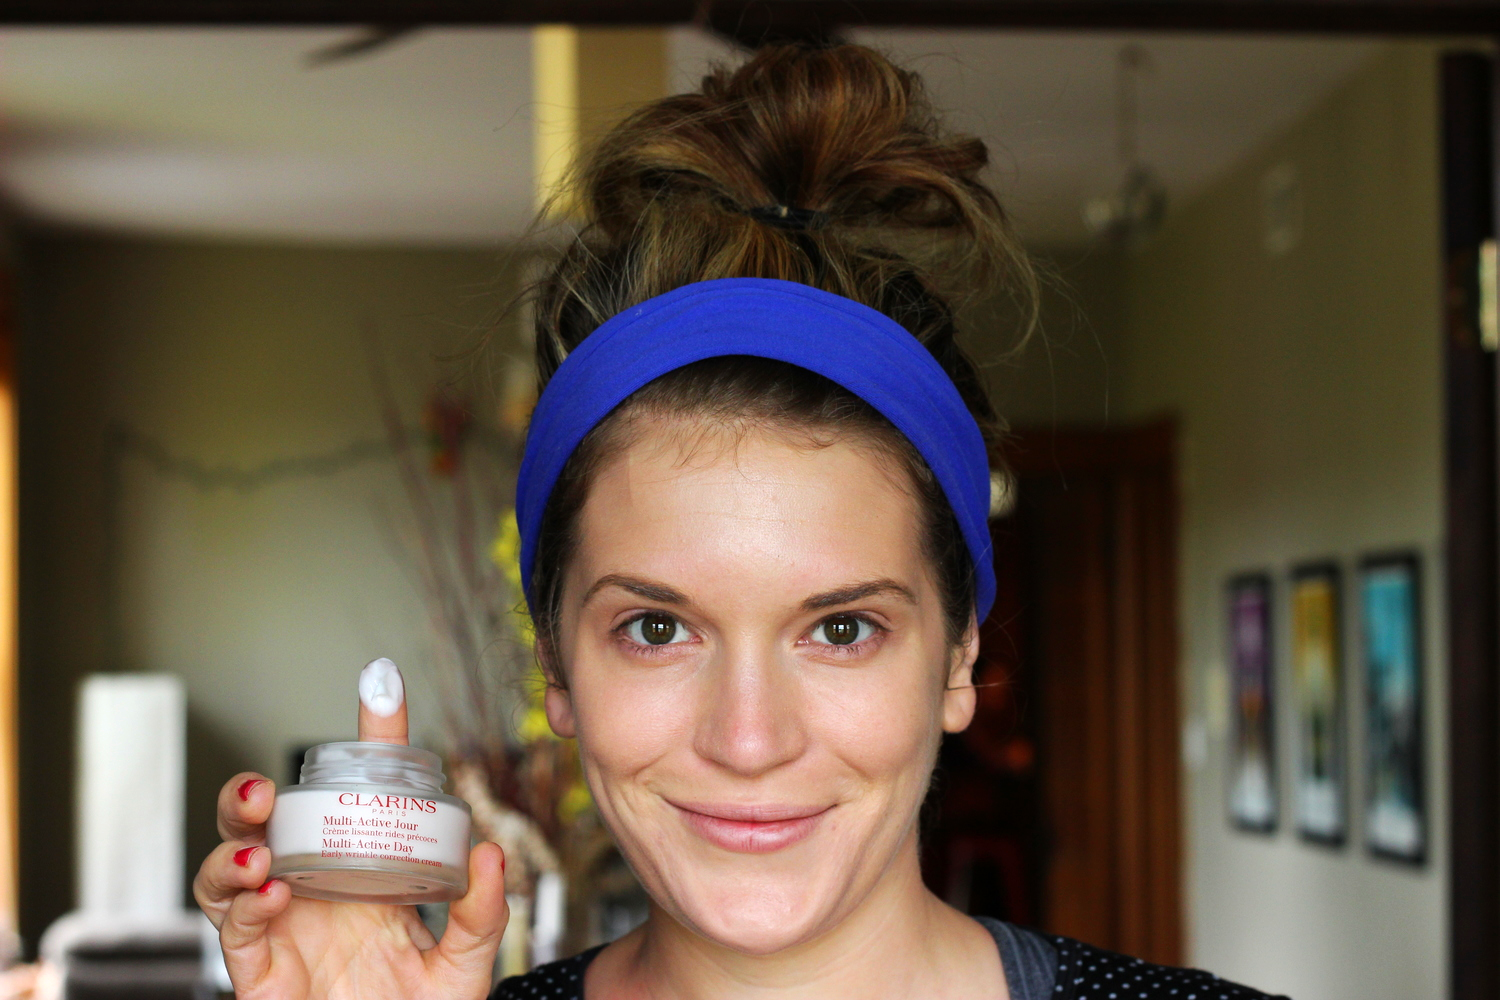 Clarins multi-active jour on belle meets world blog